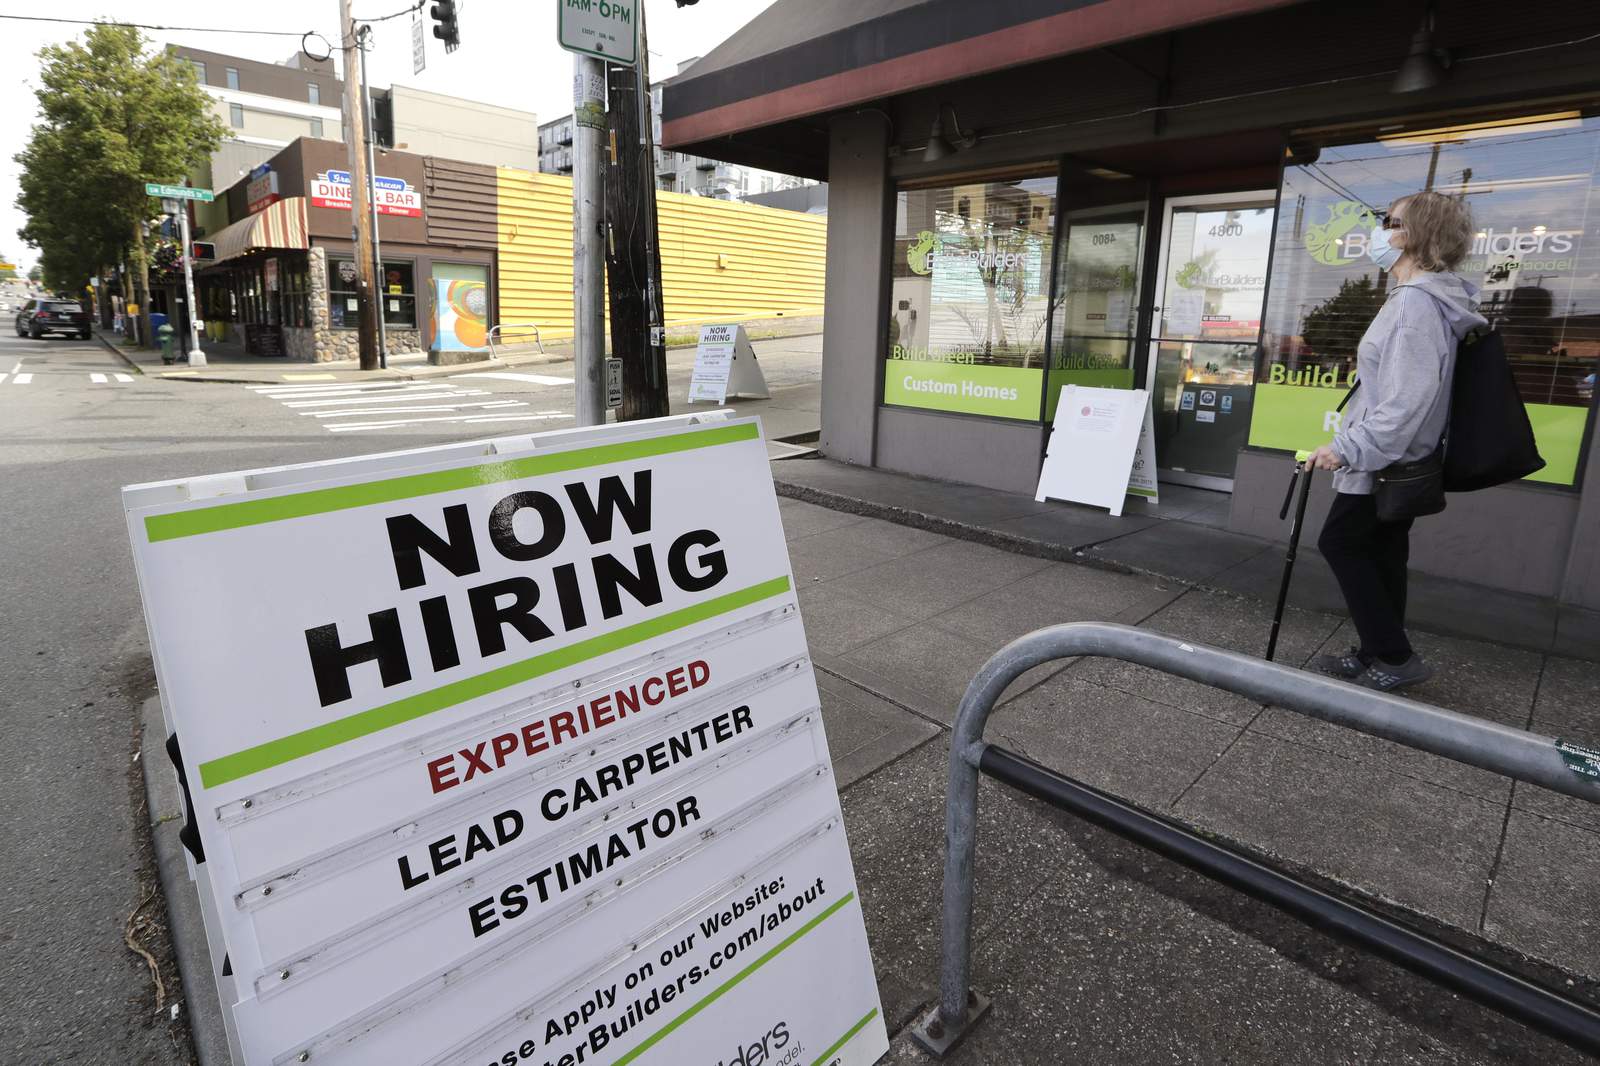 5 things to watch for in Thursday's jobs report for June